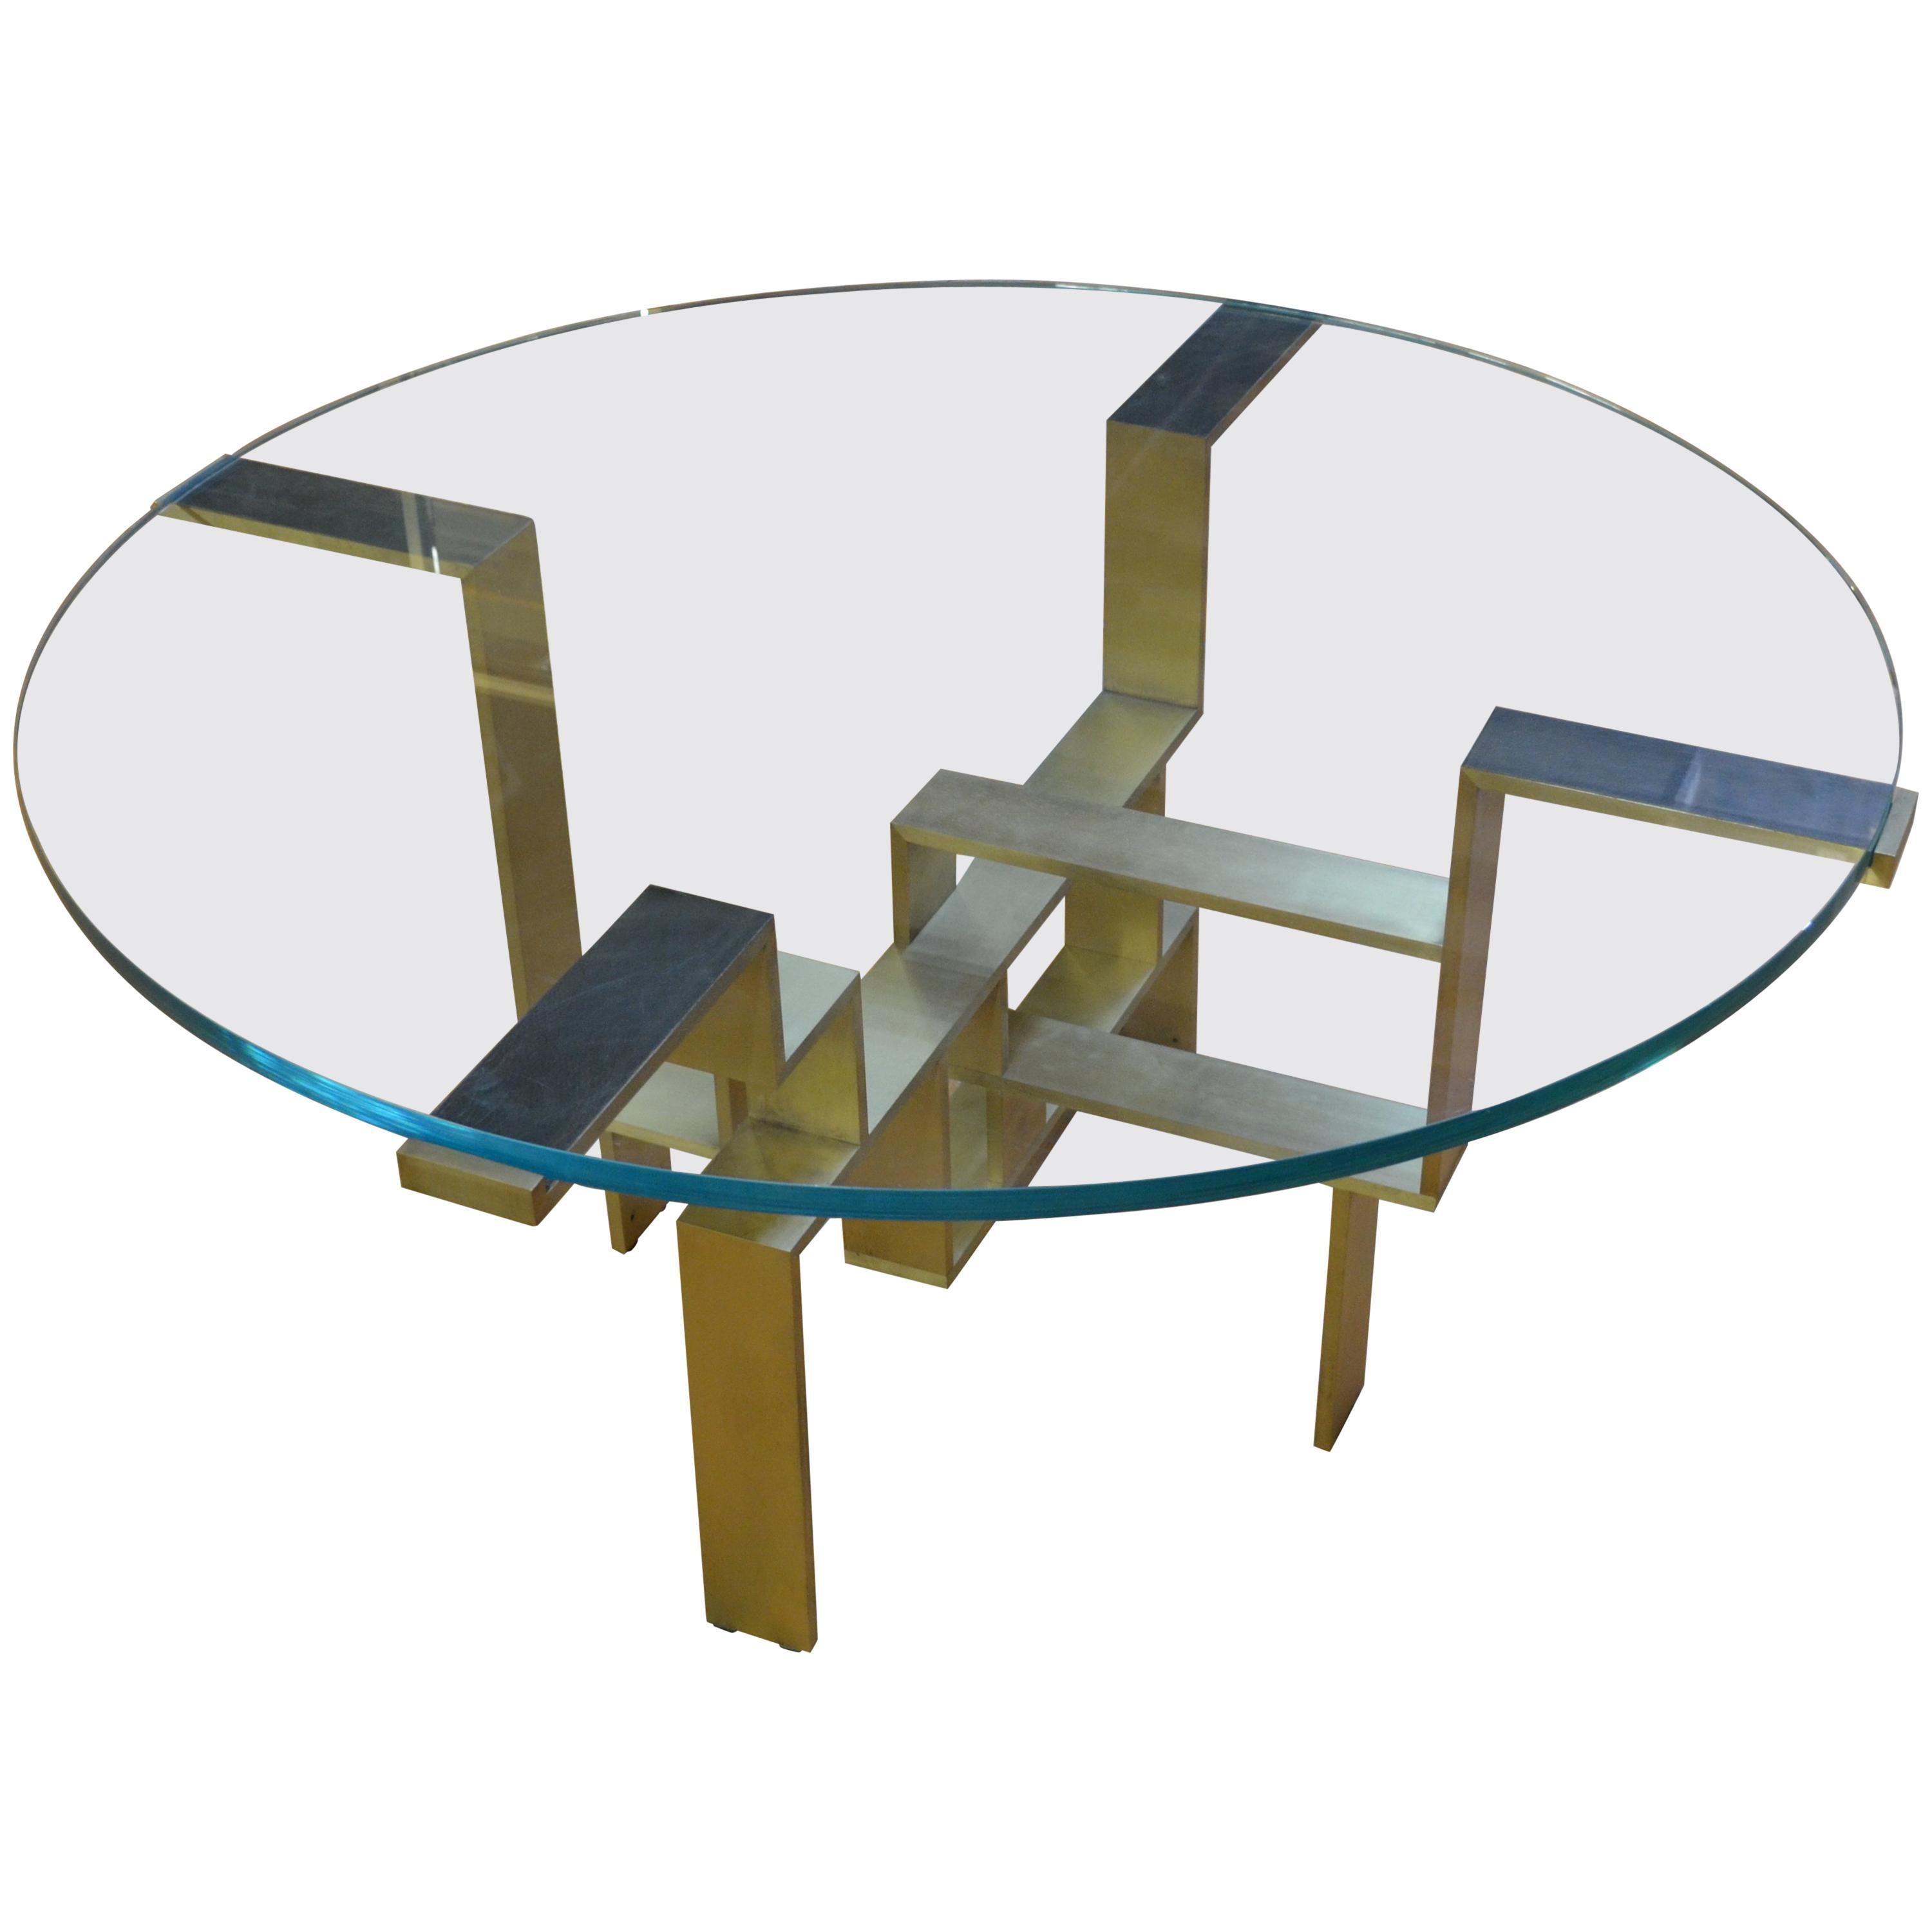 In-Stock Metropolis Glass Top Polished Brass Base Table For Sale